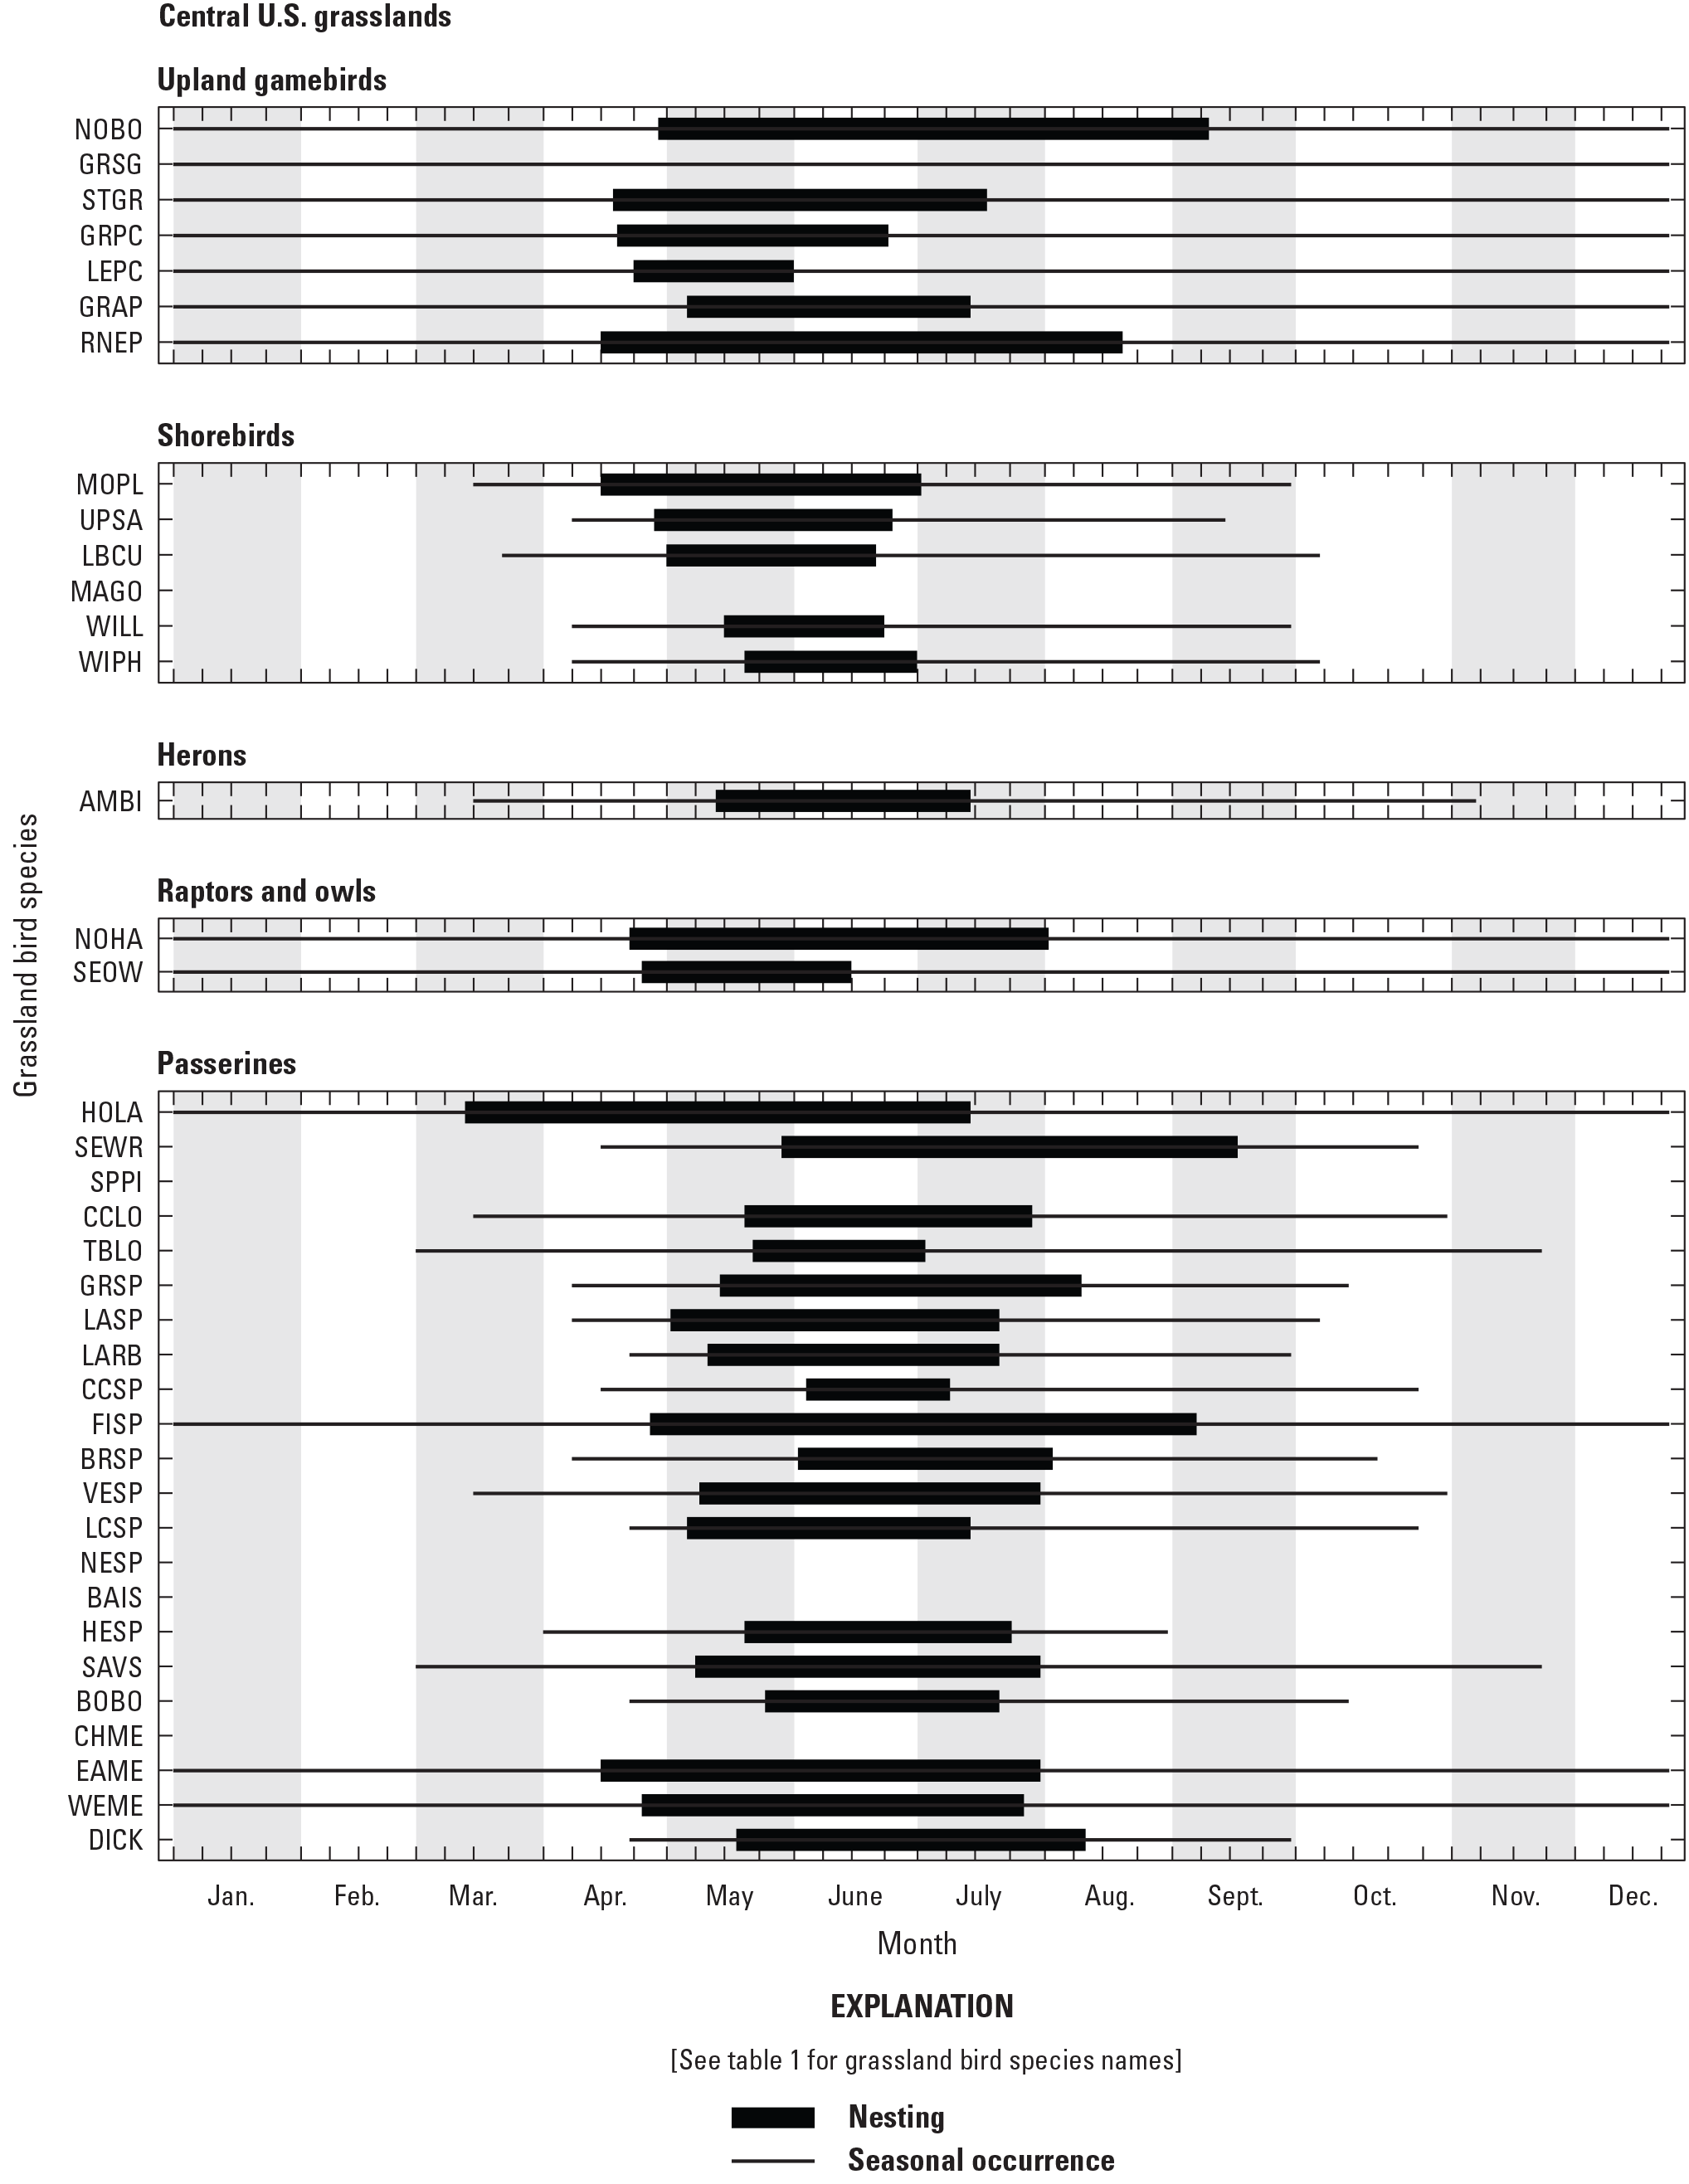 Figure showing seasonal occurrence and nesting phenology for 38 grassland bird species
                     in the central U.S. grasslands.